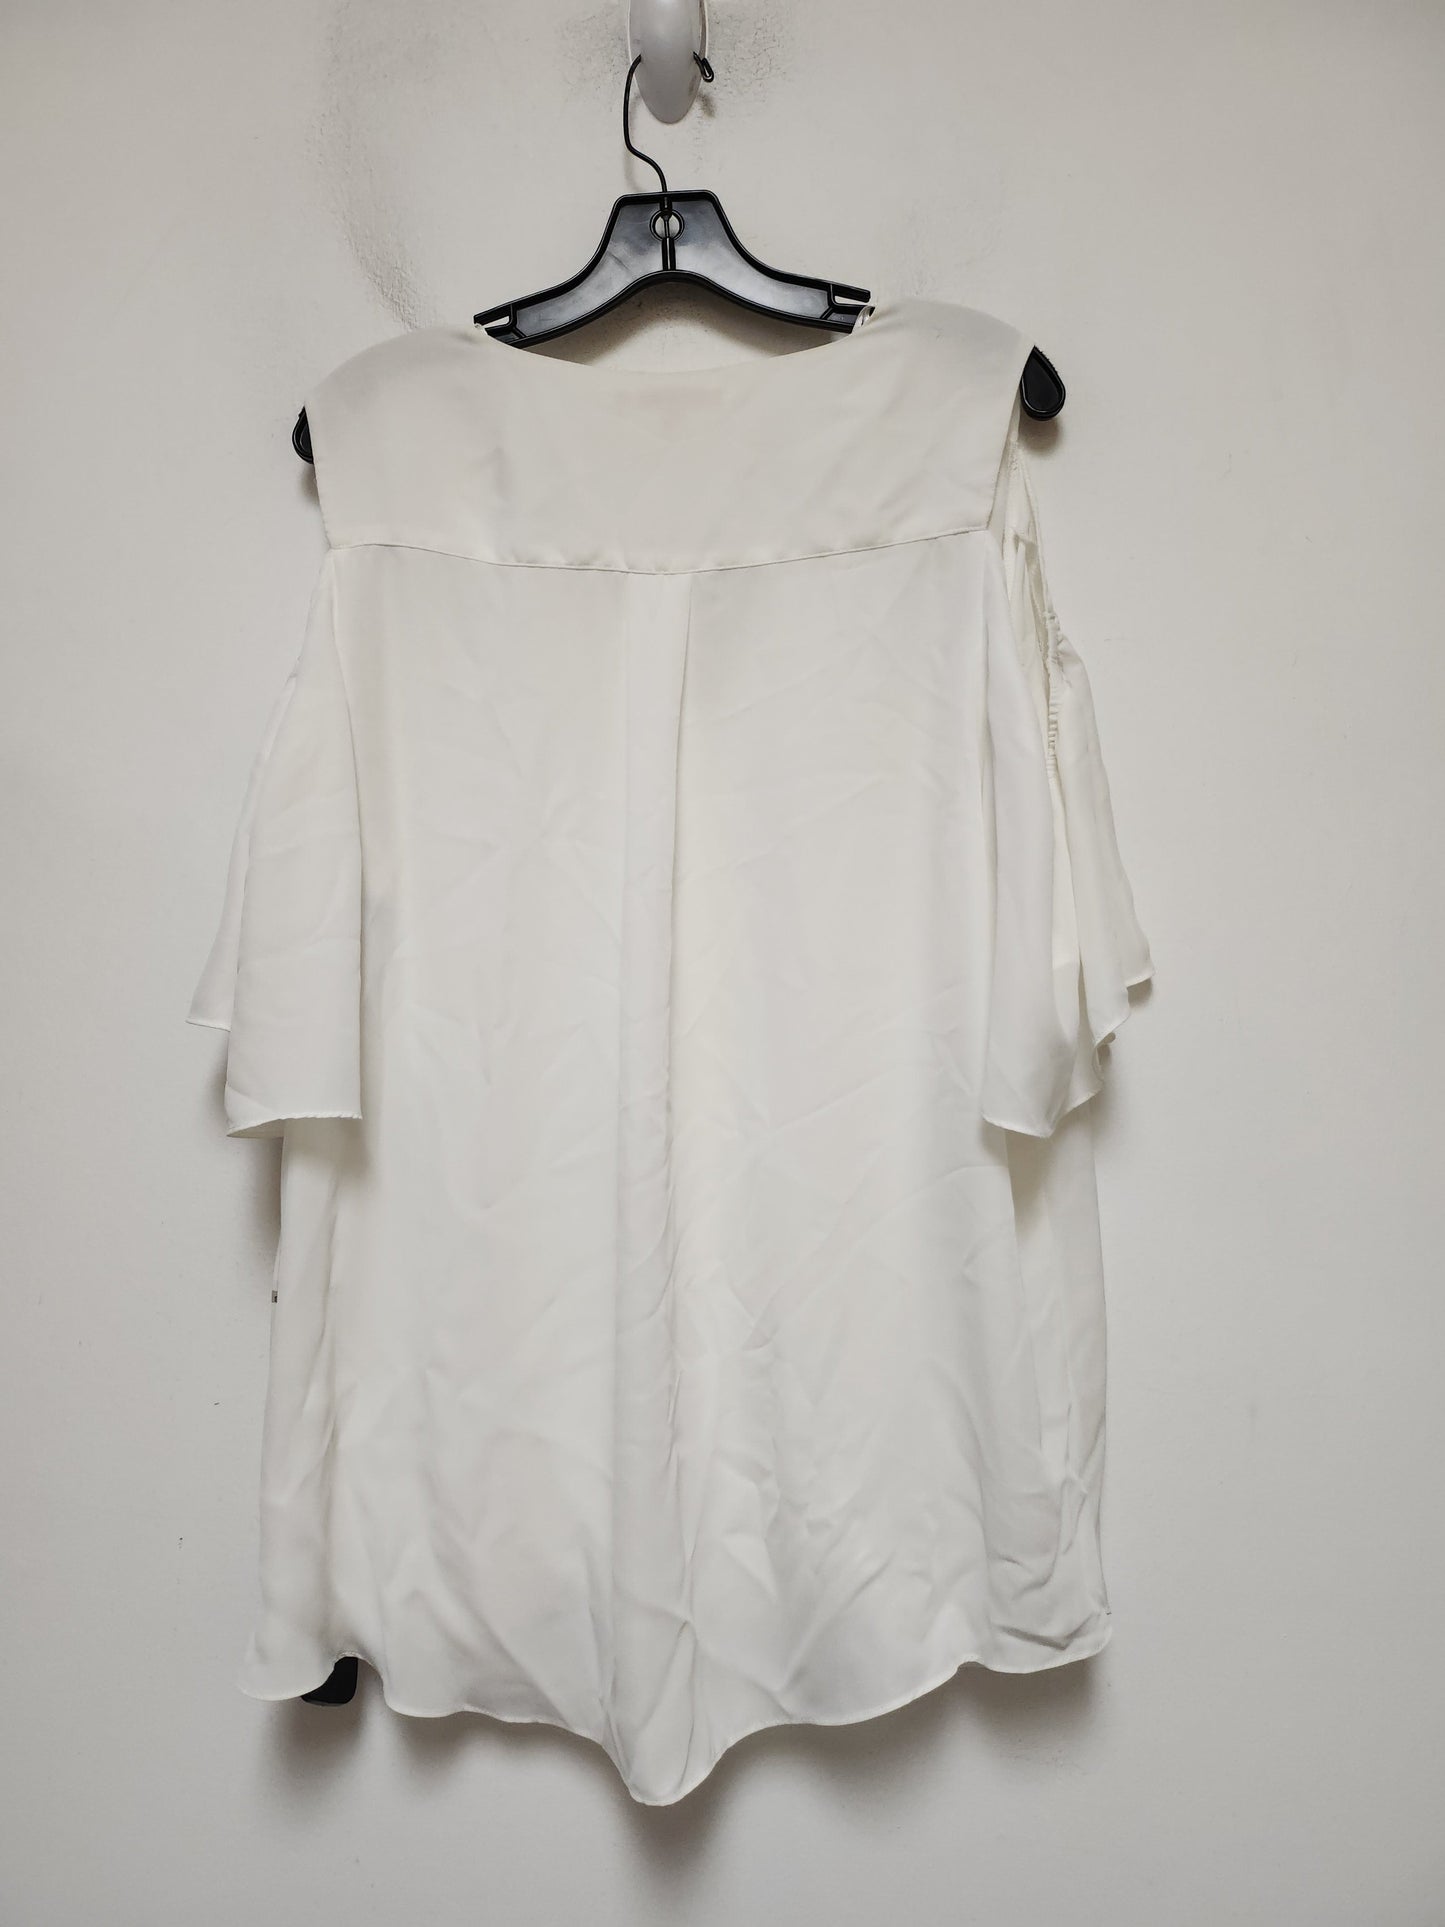 White Top Short Sleeve Gibson And Latimer, Size 1x